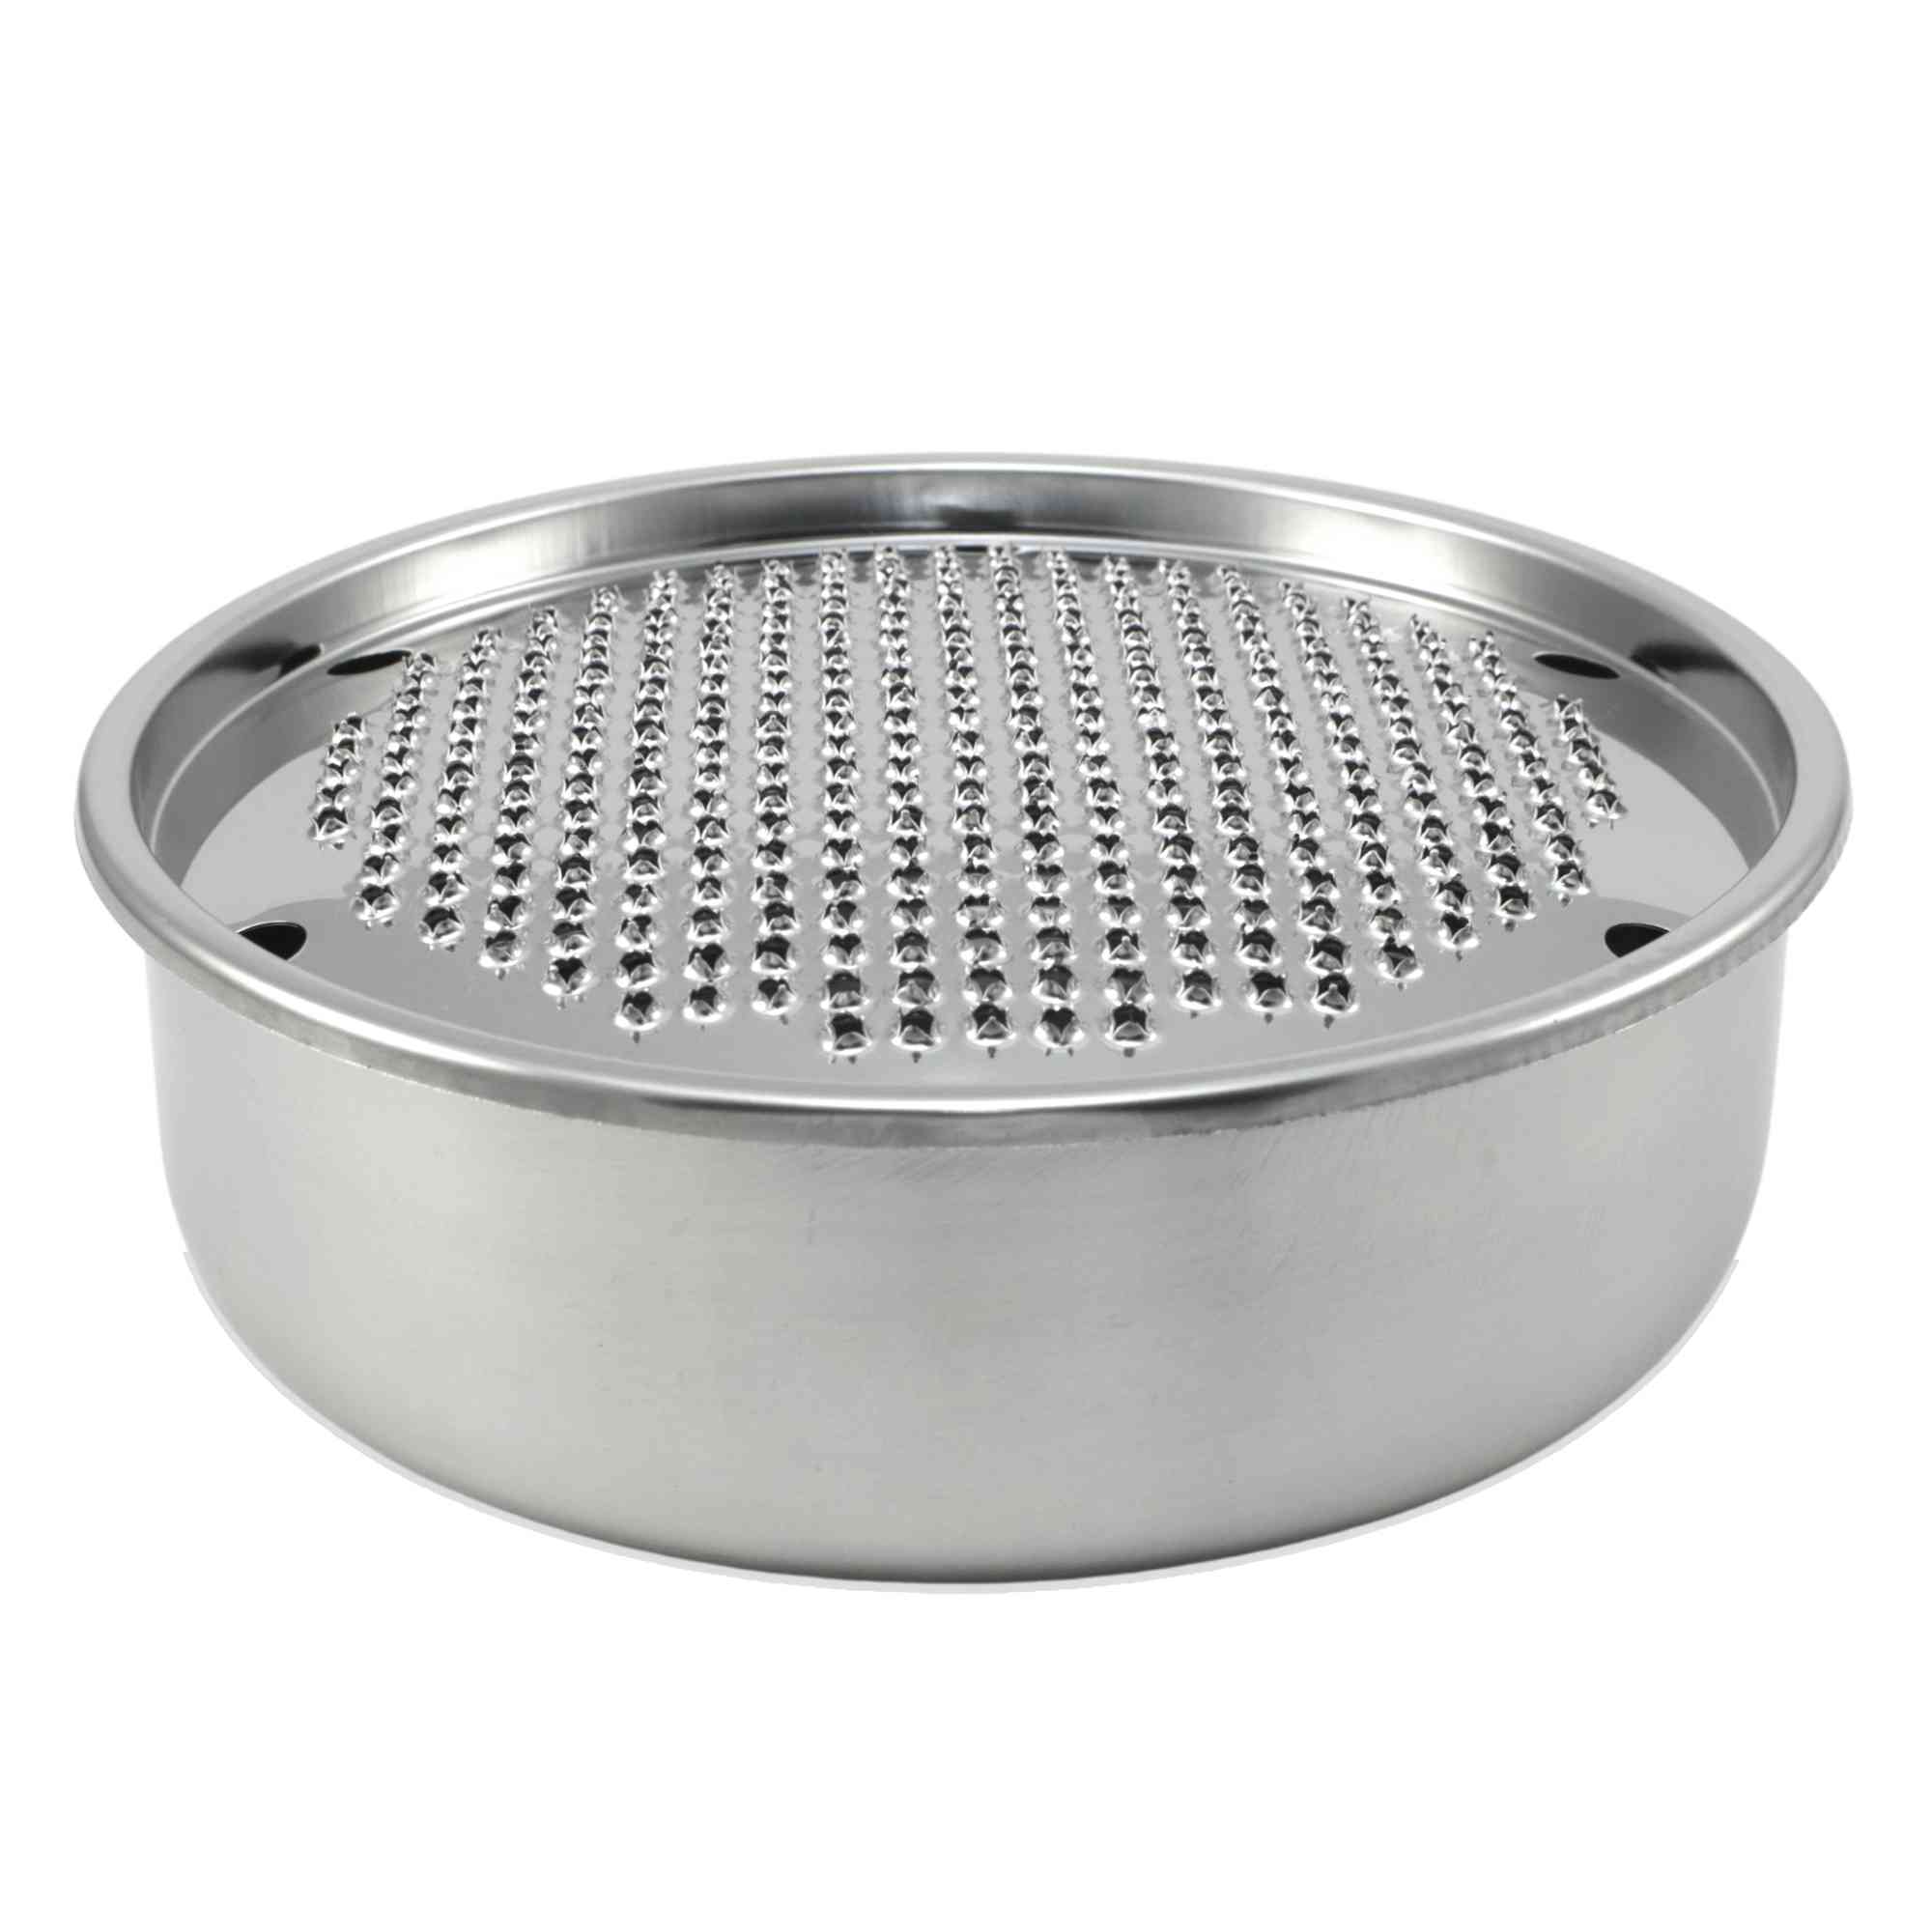 https://www.italiancookshop.com/cdn/shop/products/Round-bowl-stainless-steel-cheese-parmesan-grater.jpg?v=1646994896